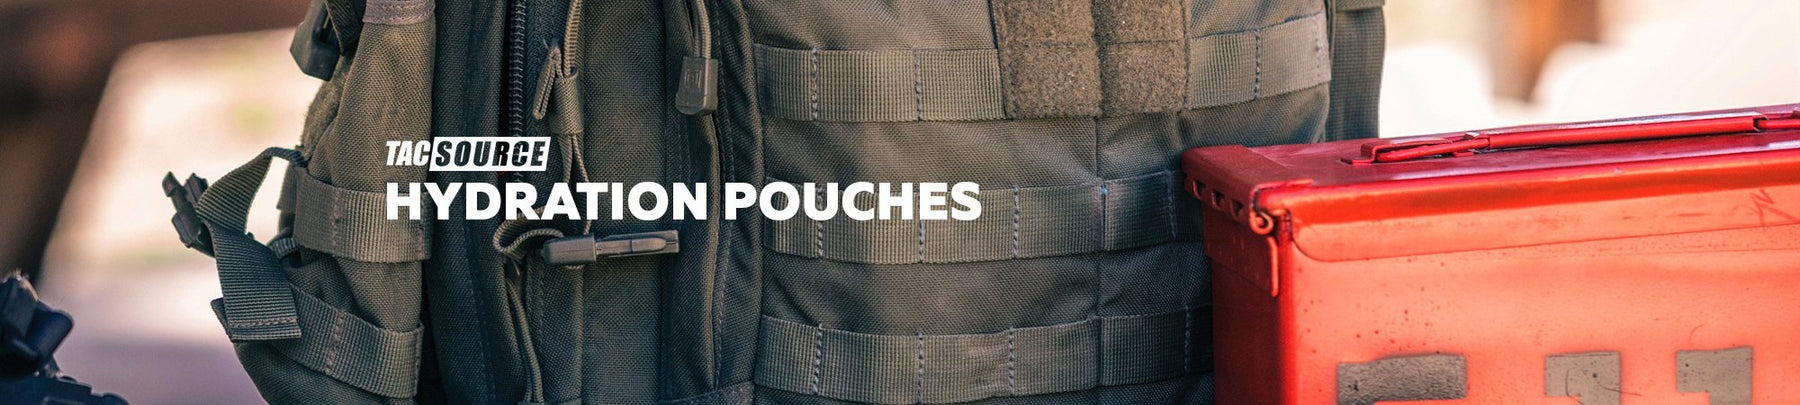 Hydration Pouches-TacSource